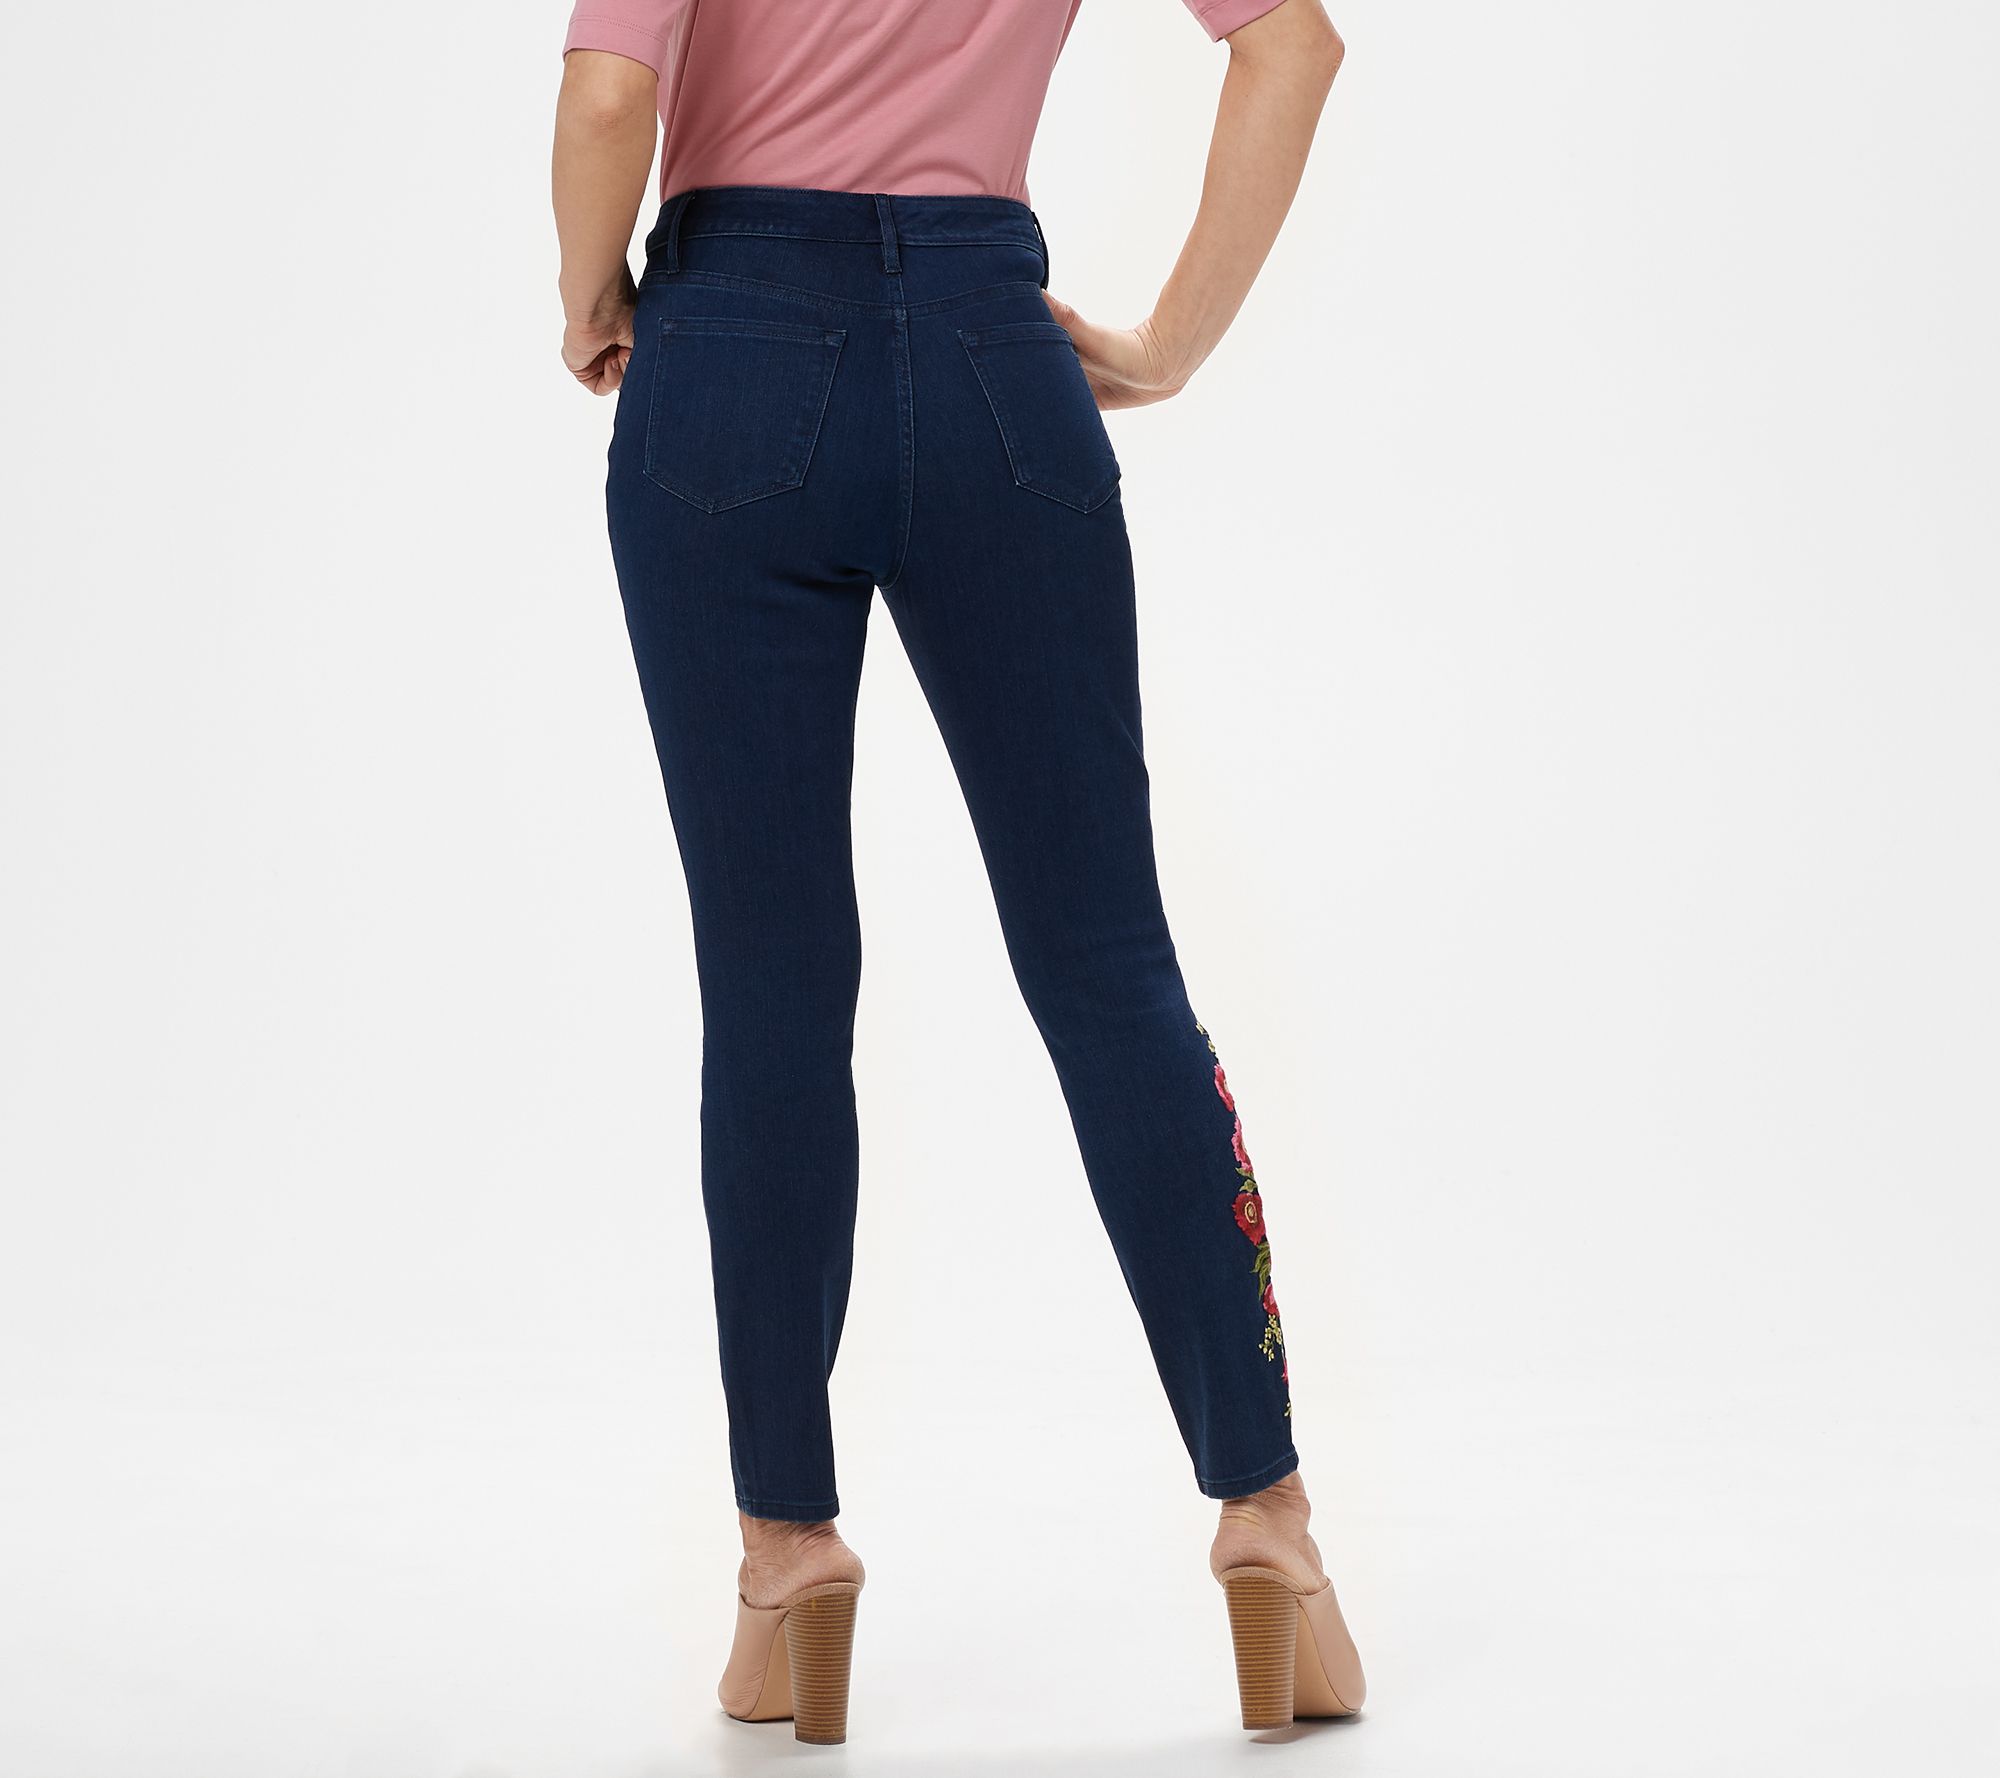 QVC - MARTHA STYLE!🍃🌷 Embroidered denim, sophisticated